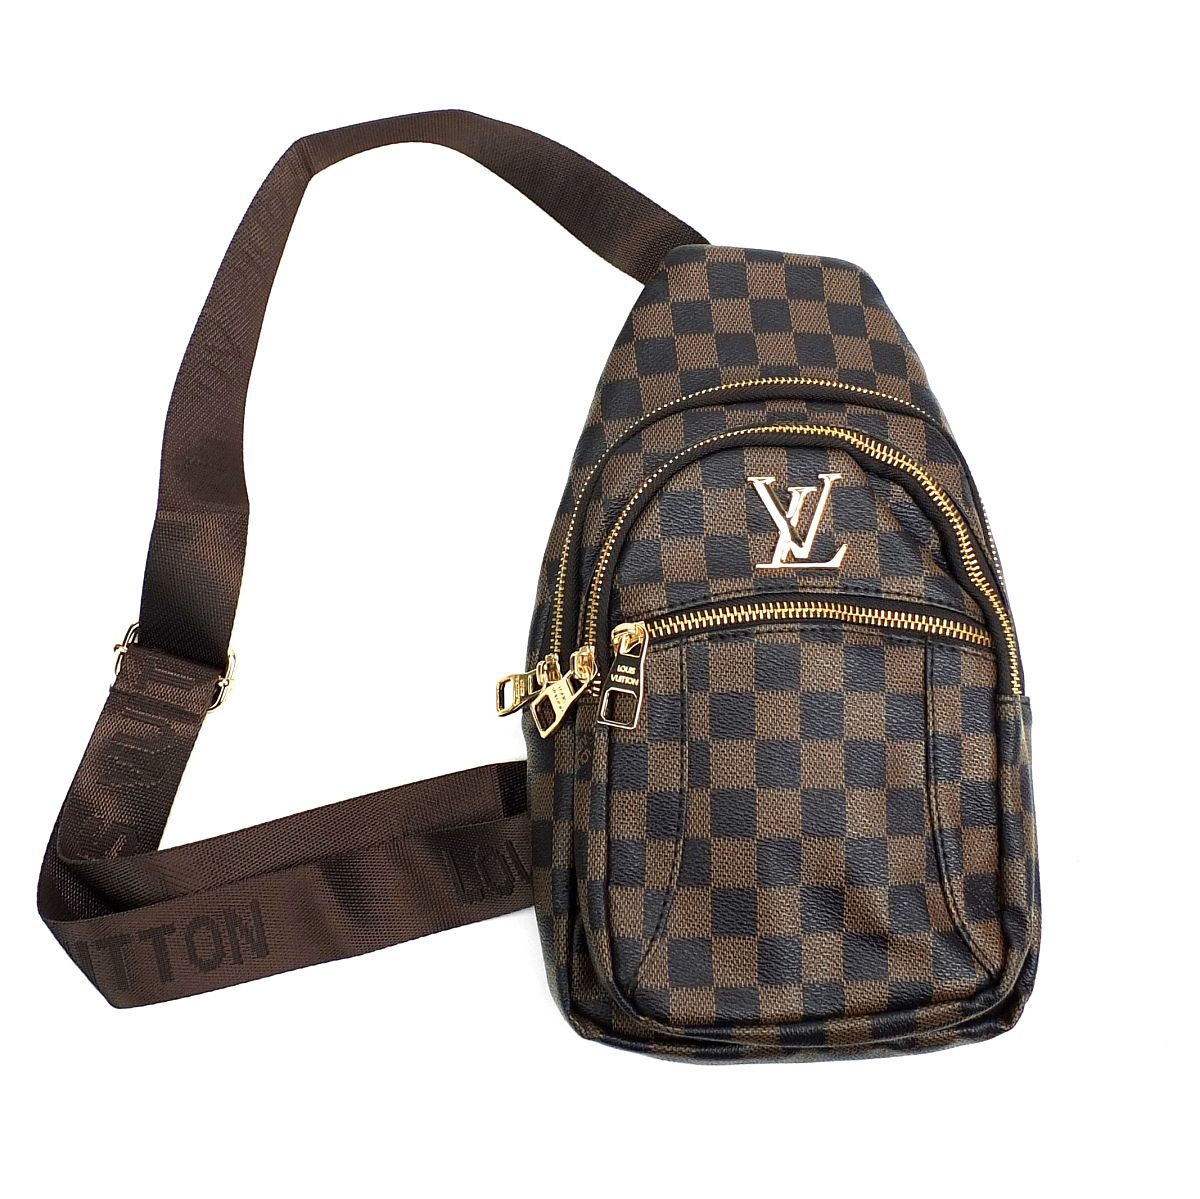 Replica Louis Vuitton Sling Bag for sale at auction on 30th